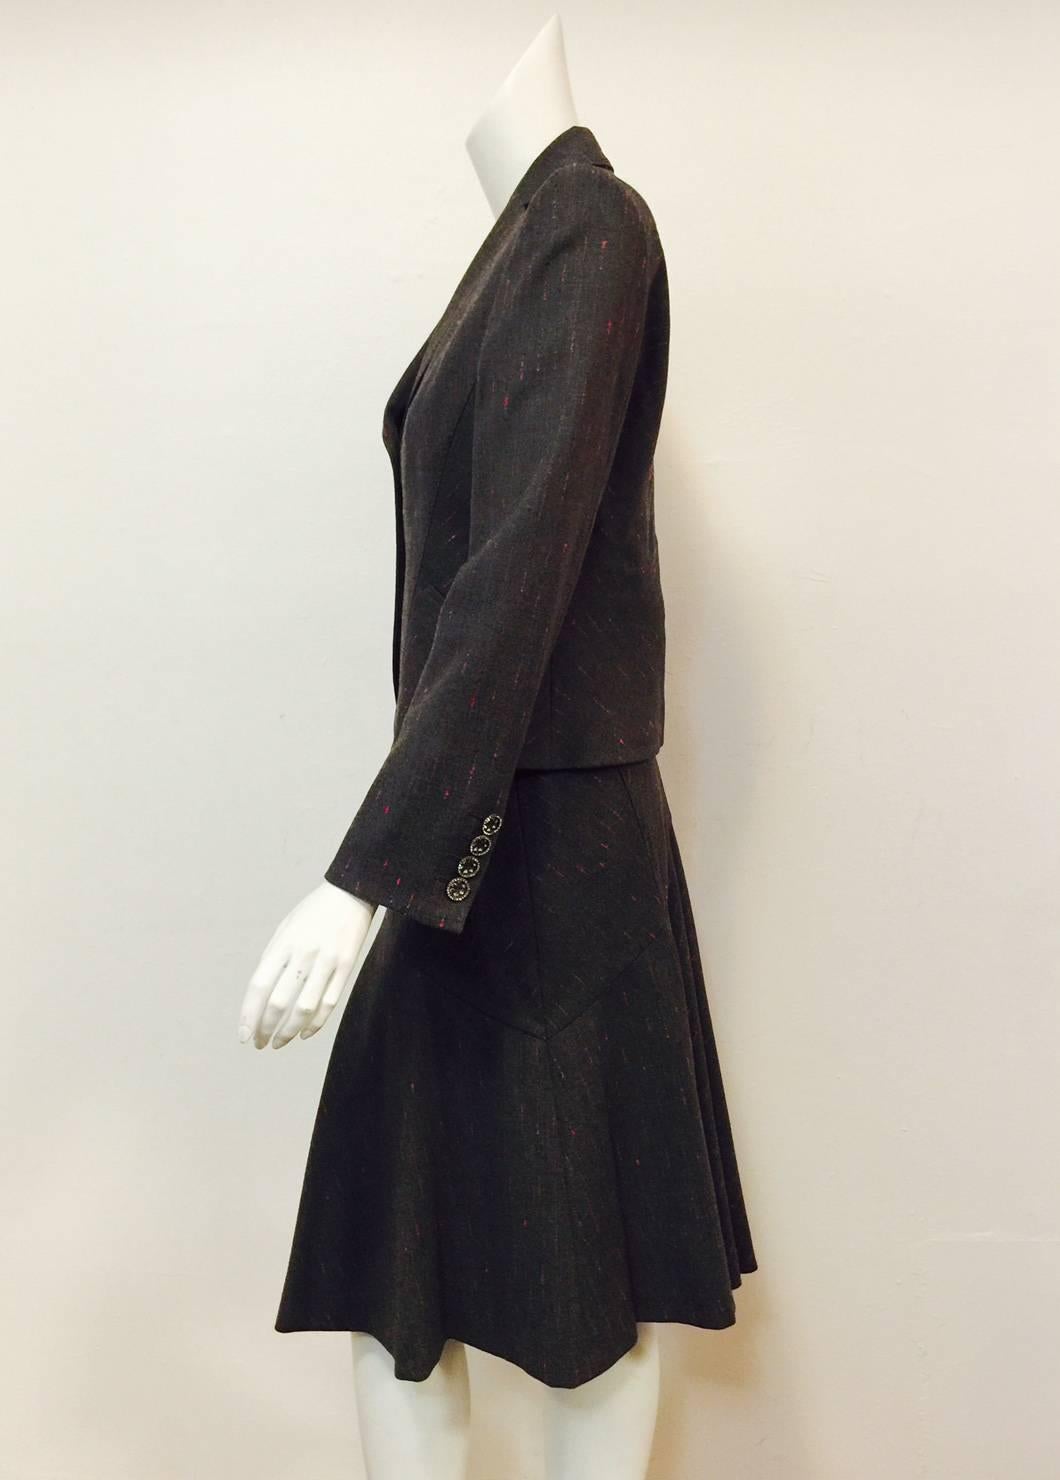 This Les Copains Skirt Suit is replete with exquisite Italian tailoring techniques.  Features ultra-luxurious Italian 